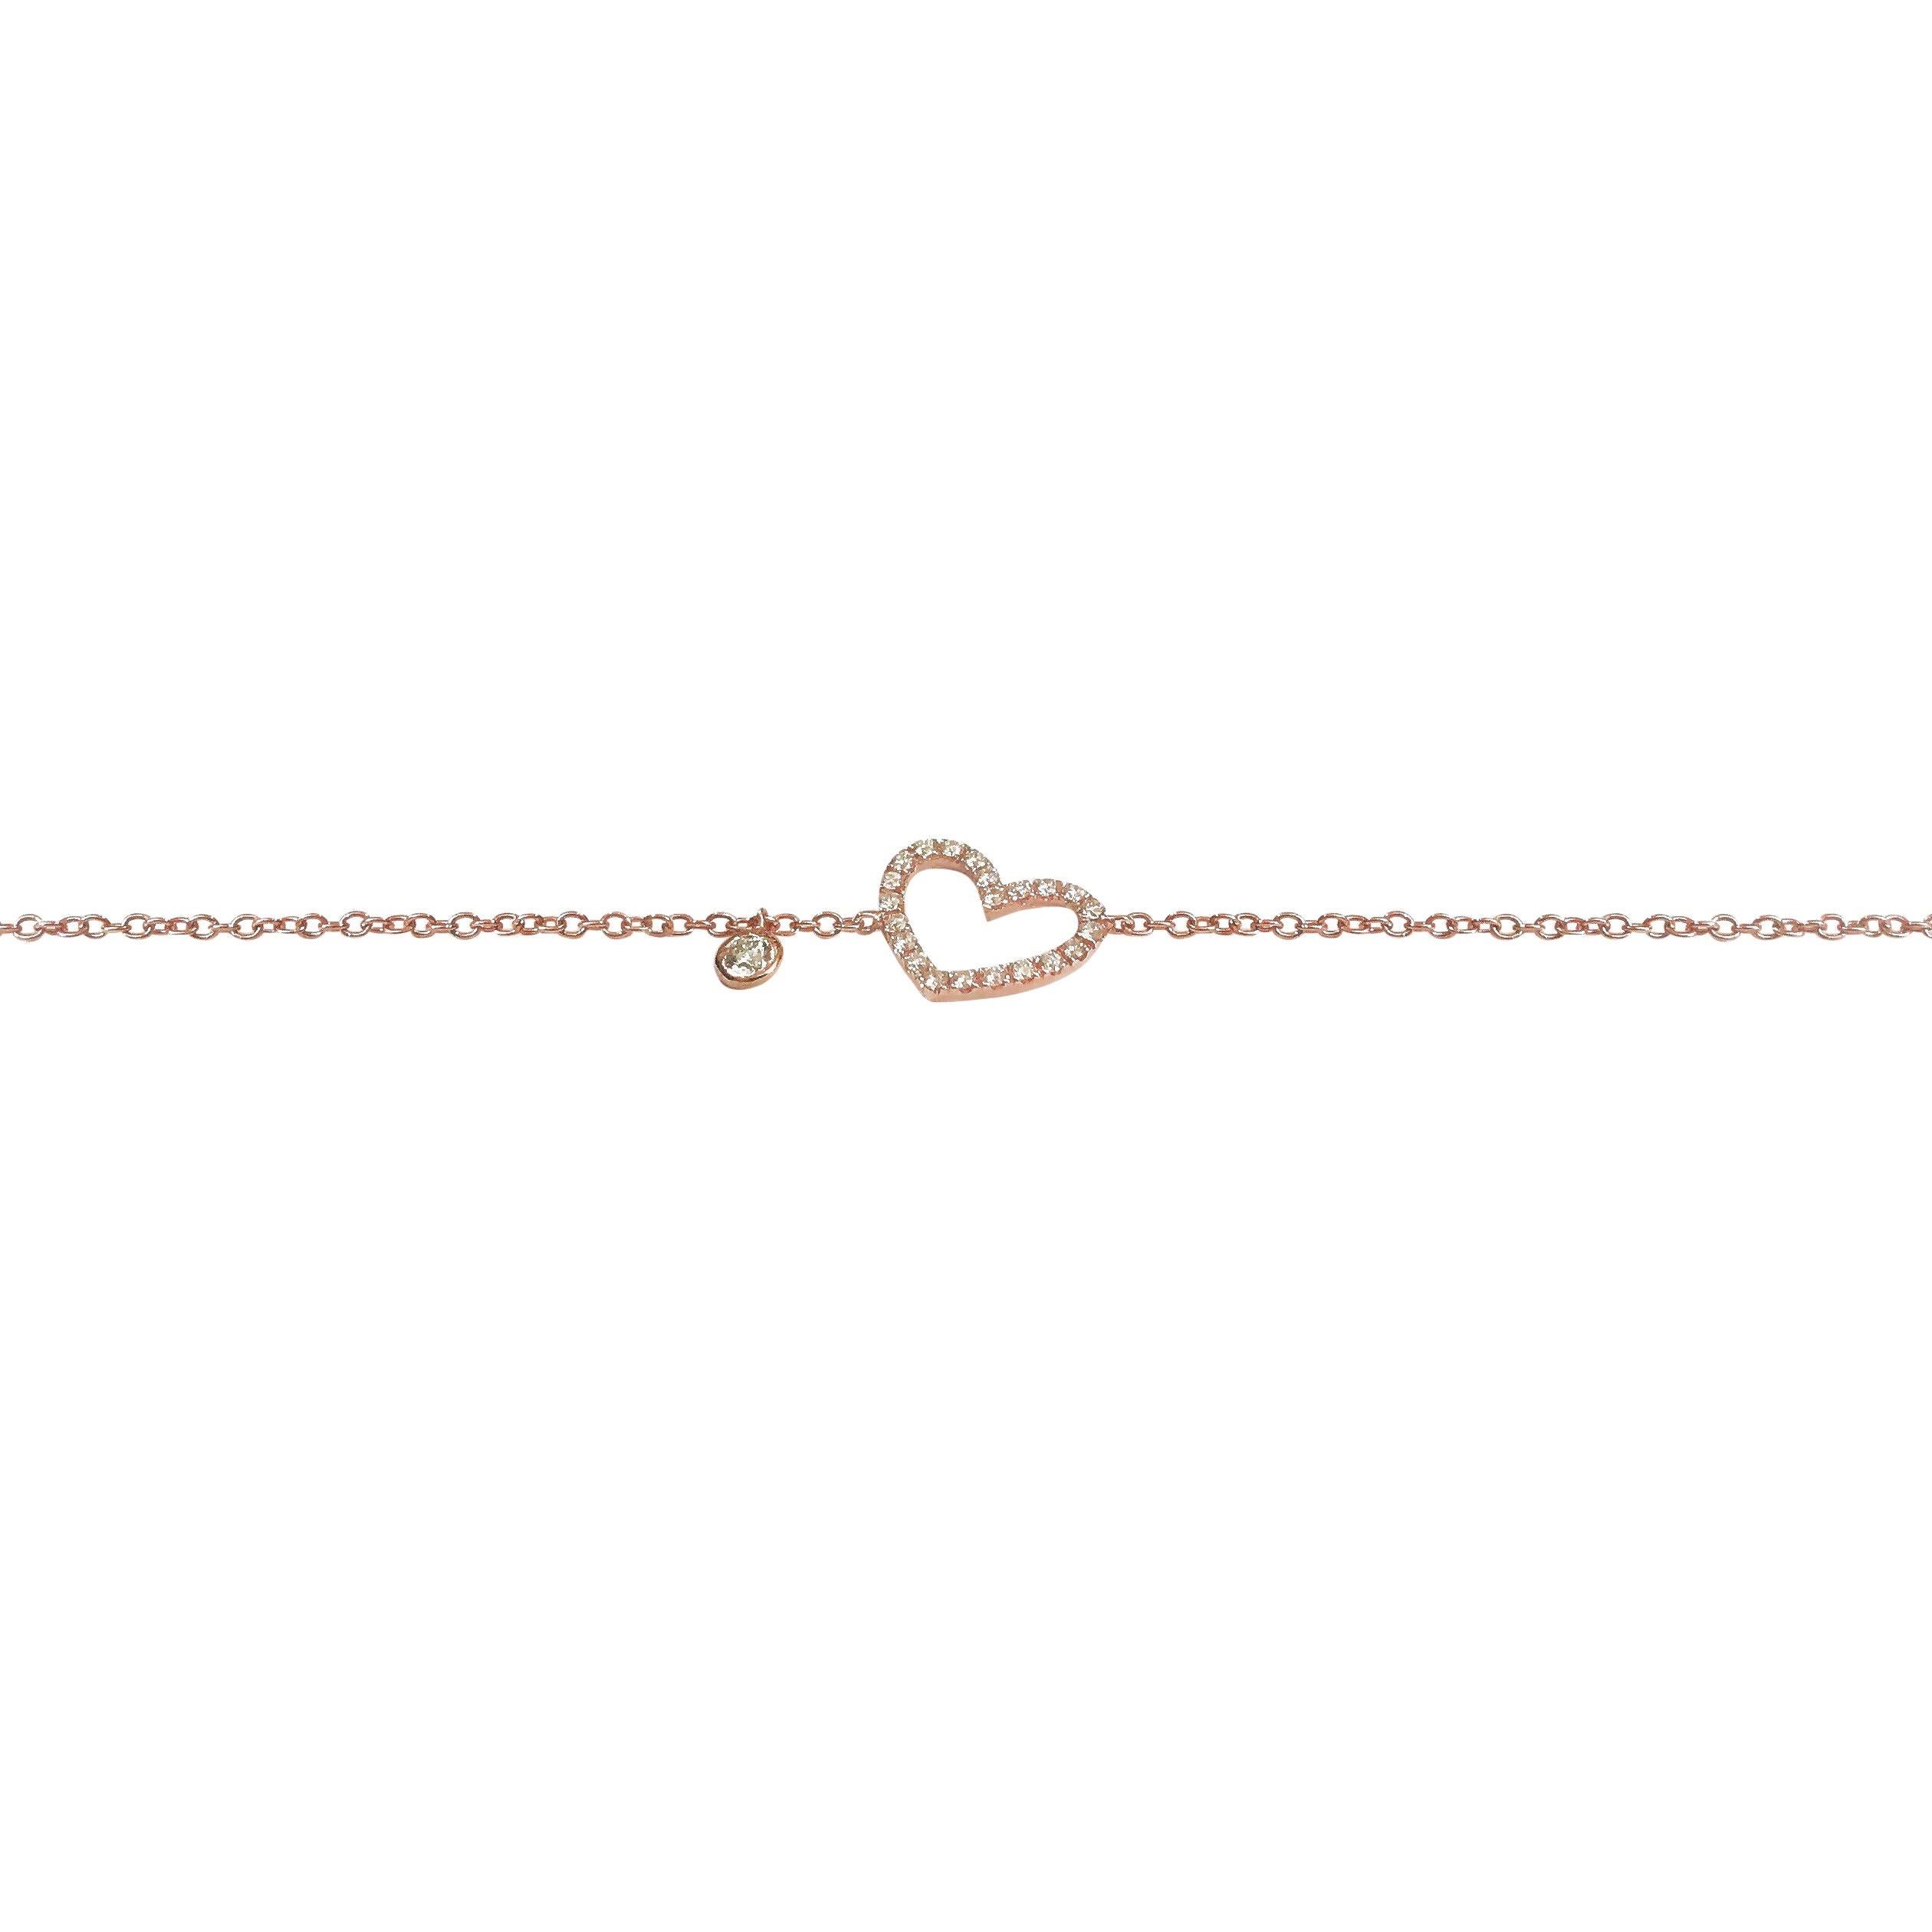 18 Karat solid rose gold bracelet micro-set with high quality white diamonds.
Easy to wear any time of the day throughout the year.
Length: 18.00 cm 
Heart’s Width: 1.10 cm
Hallmark: London Goldsmiths’s Company –  Assay Office
All our jewellery are